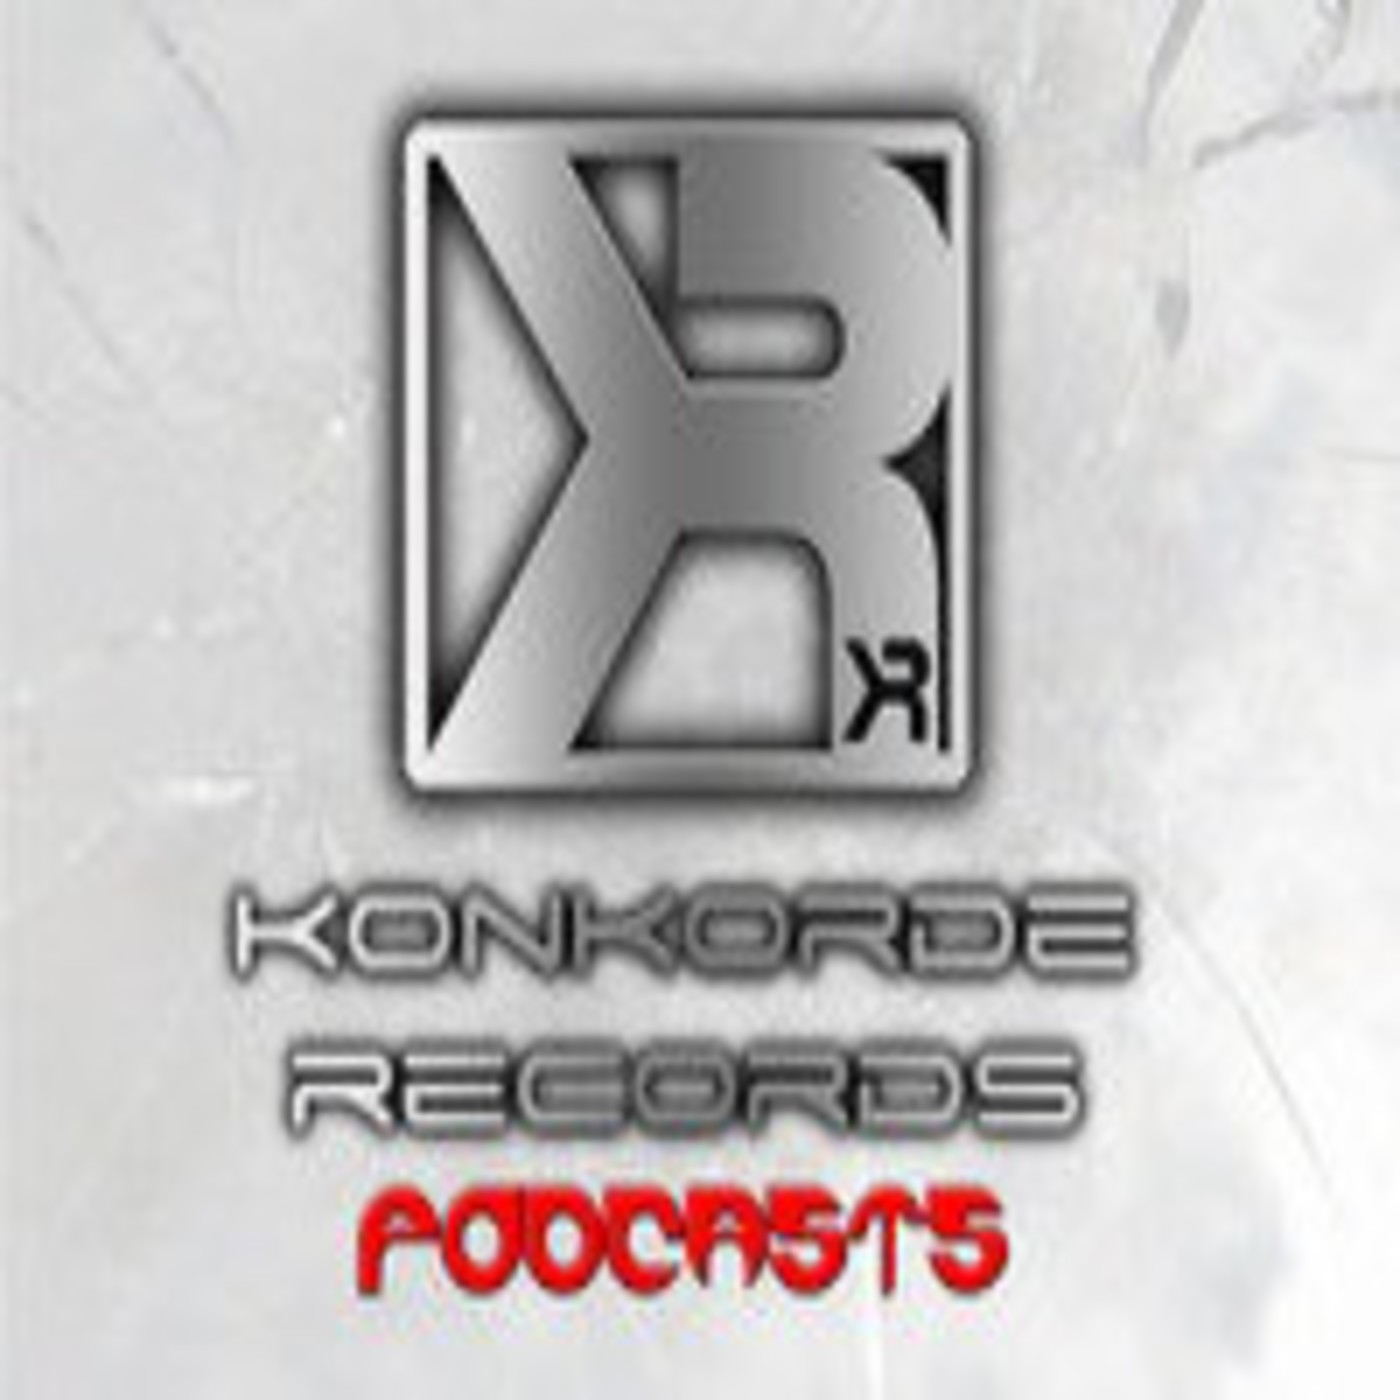 KonKorde Records Podcast 6 Mixed by Miguel Moreno